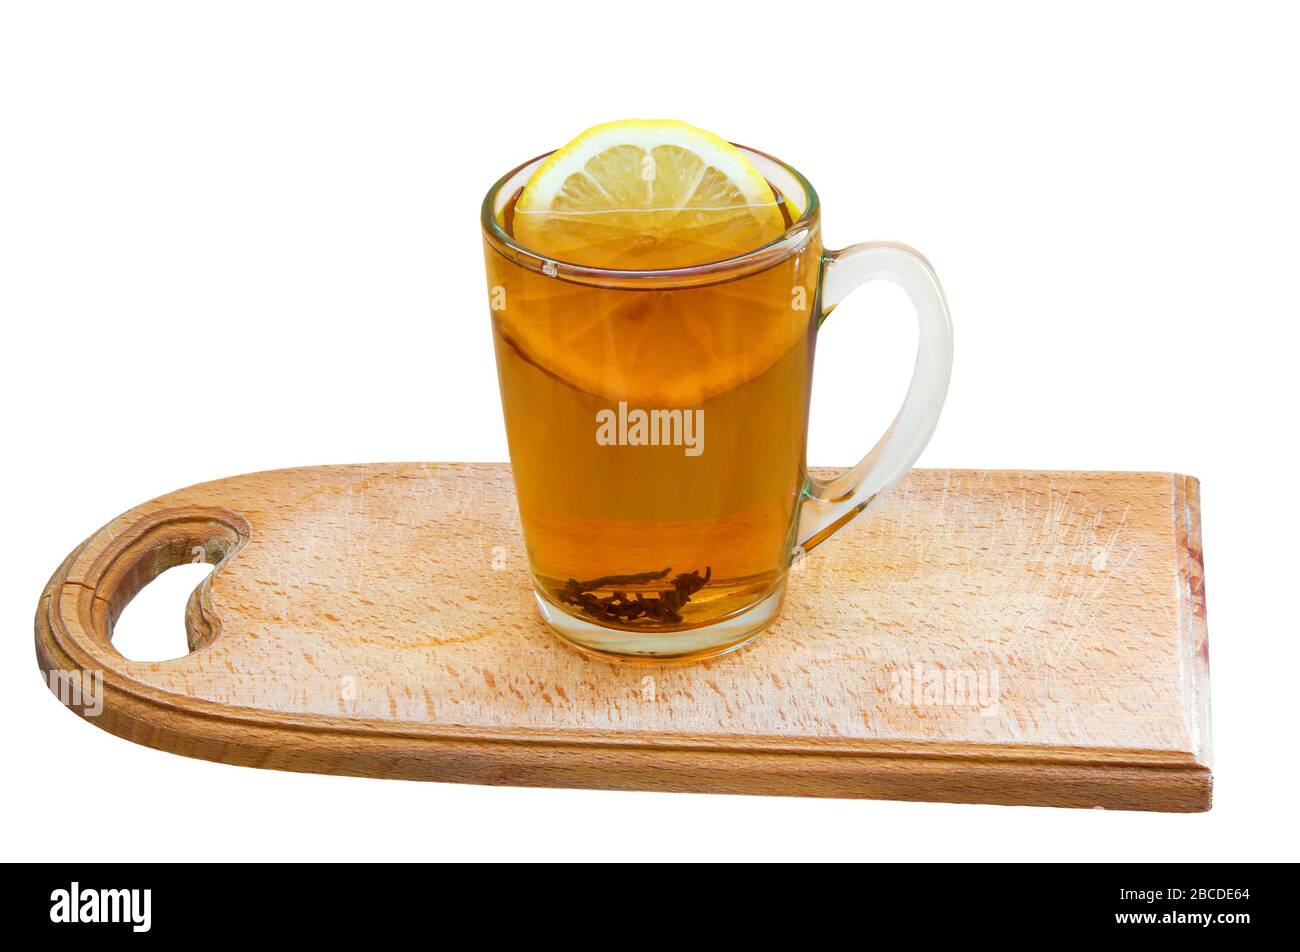 image of a glass cup of tea with lemon on a white background Stock Photo